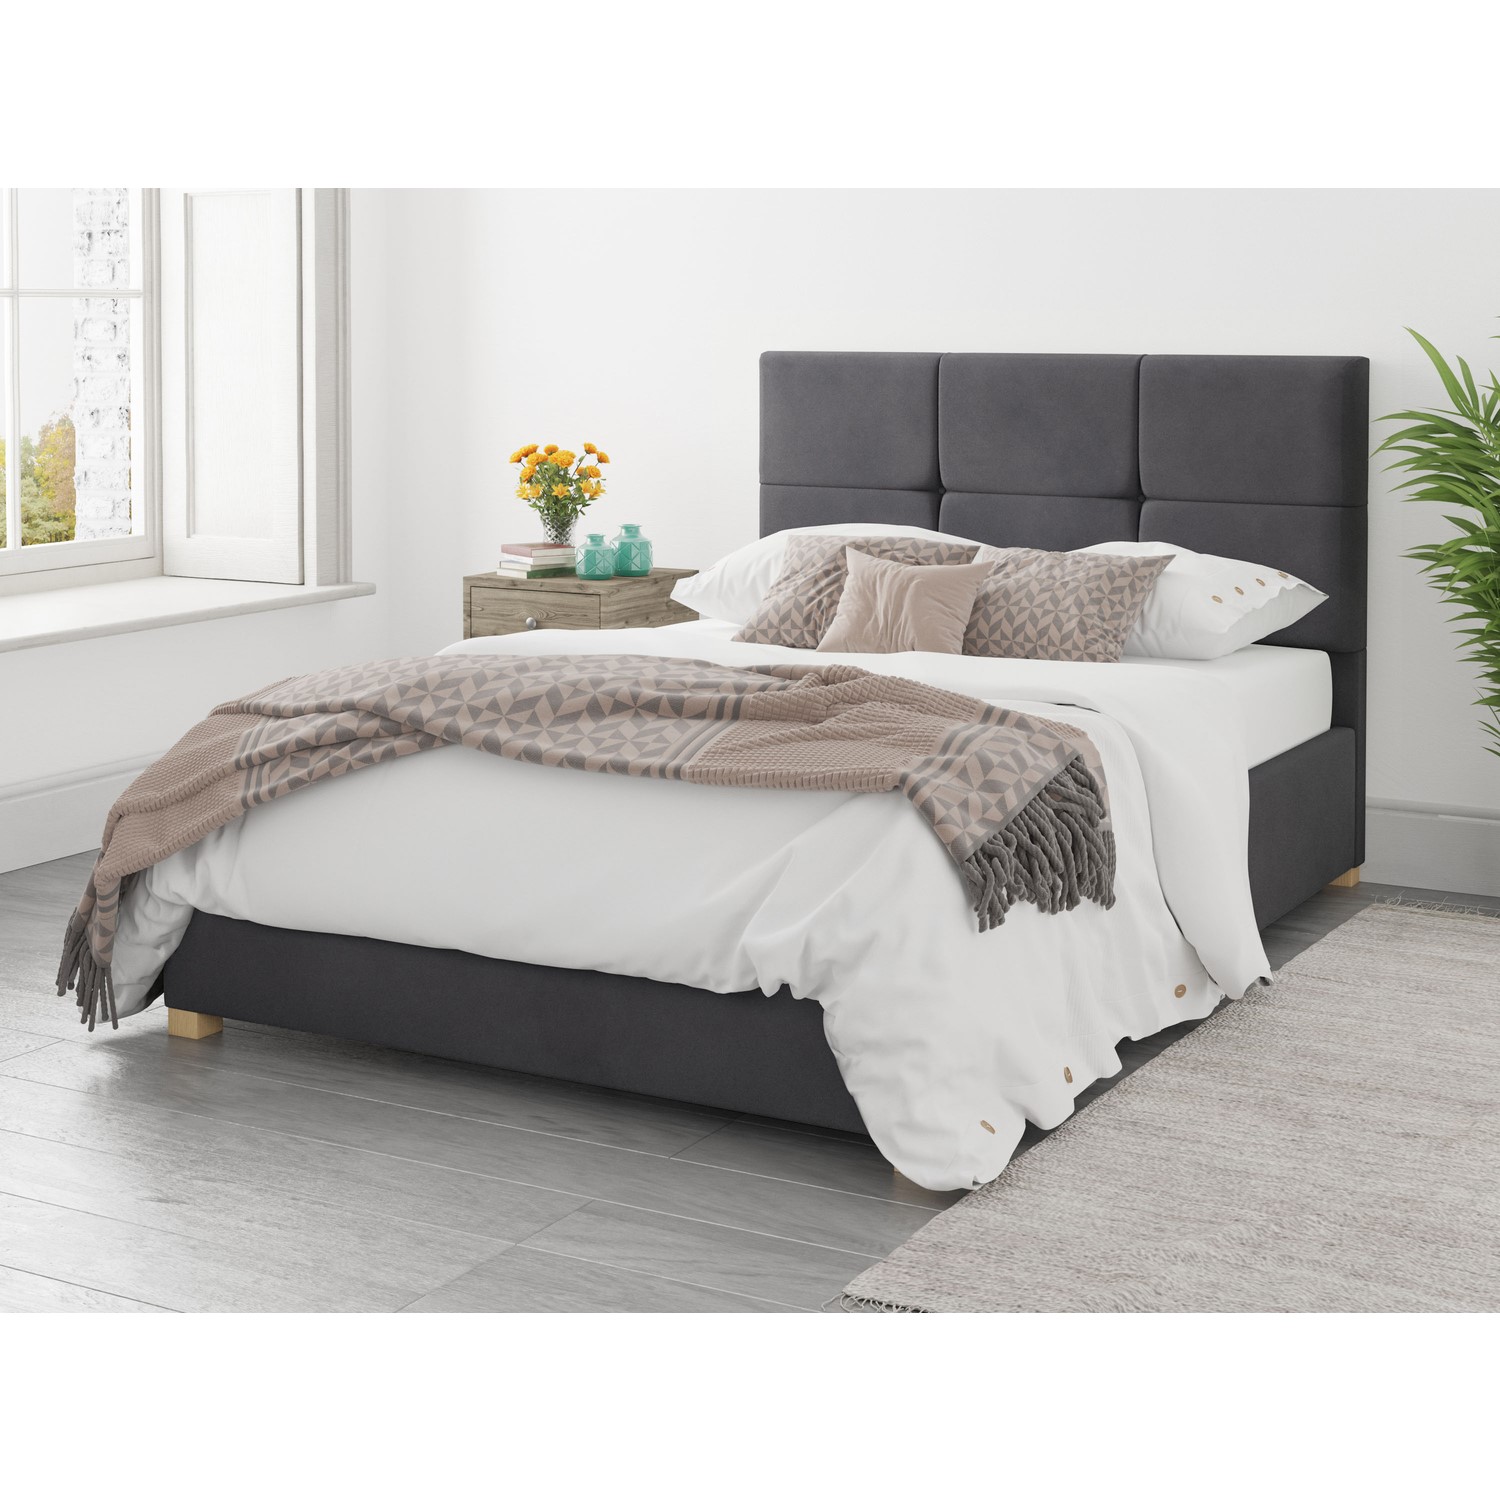 Read more about Farringdon super king size ottoman bed in grey velvet